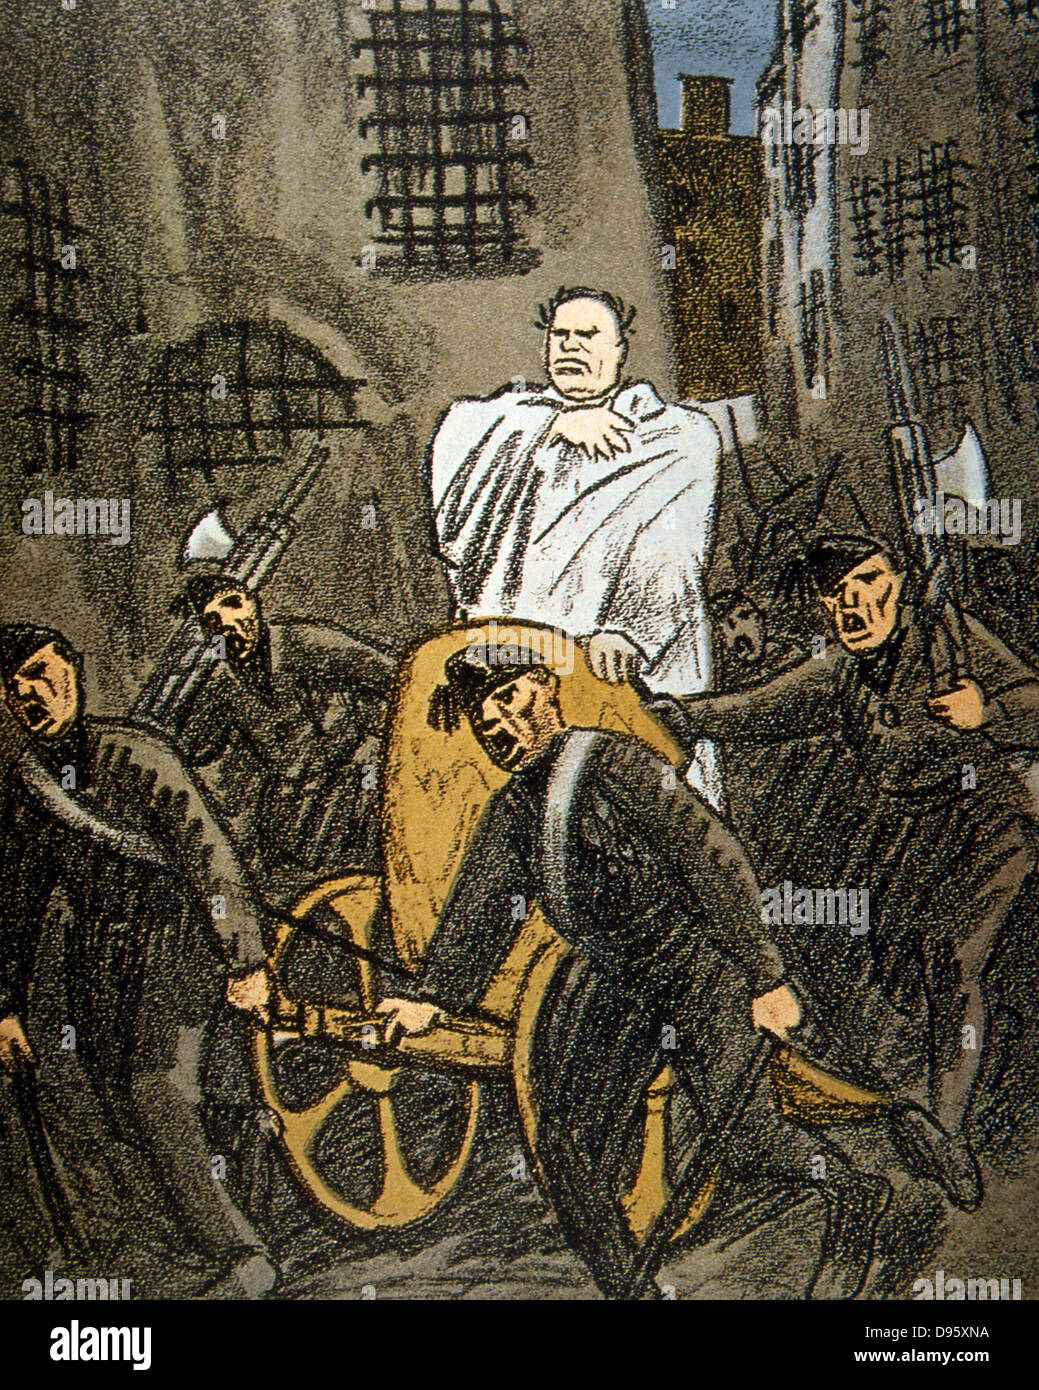 Triumphy of Mussolini in Italy, 1925. Cartoon showing the Italian Fascist dictator Benito Mussolini (1883-1945) as Caesar, proclaiming that untill all his enemies were defeated there could be no truly free Italy. Stock Photo